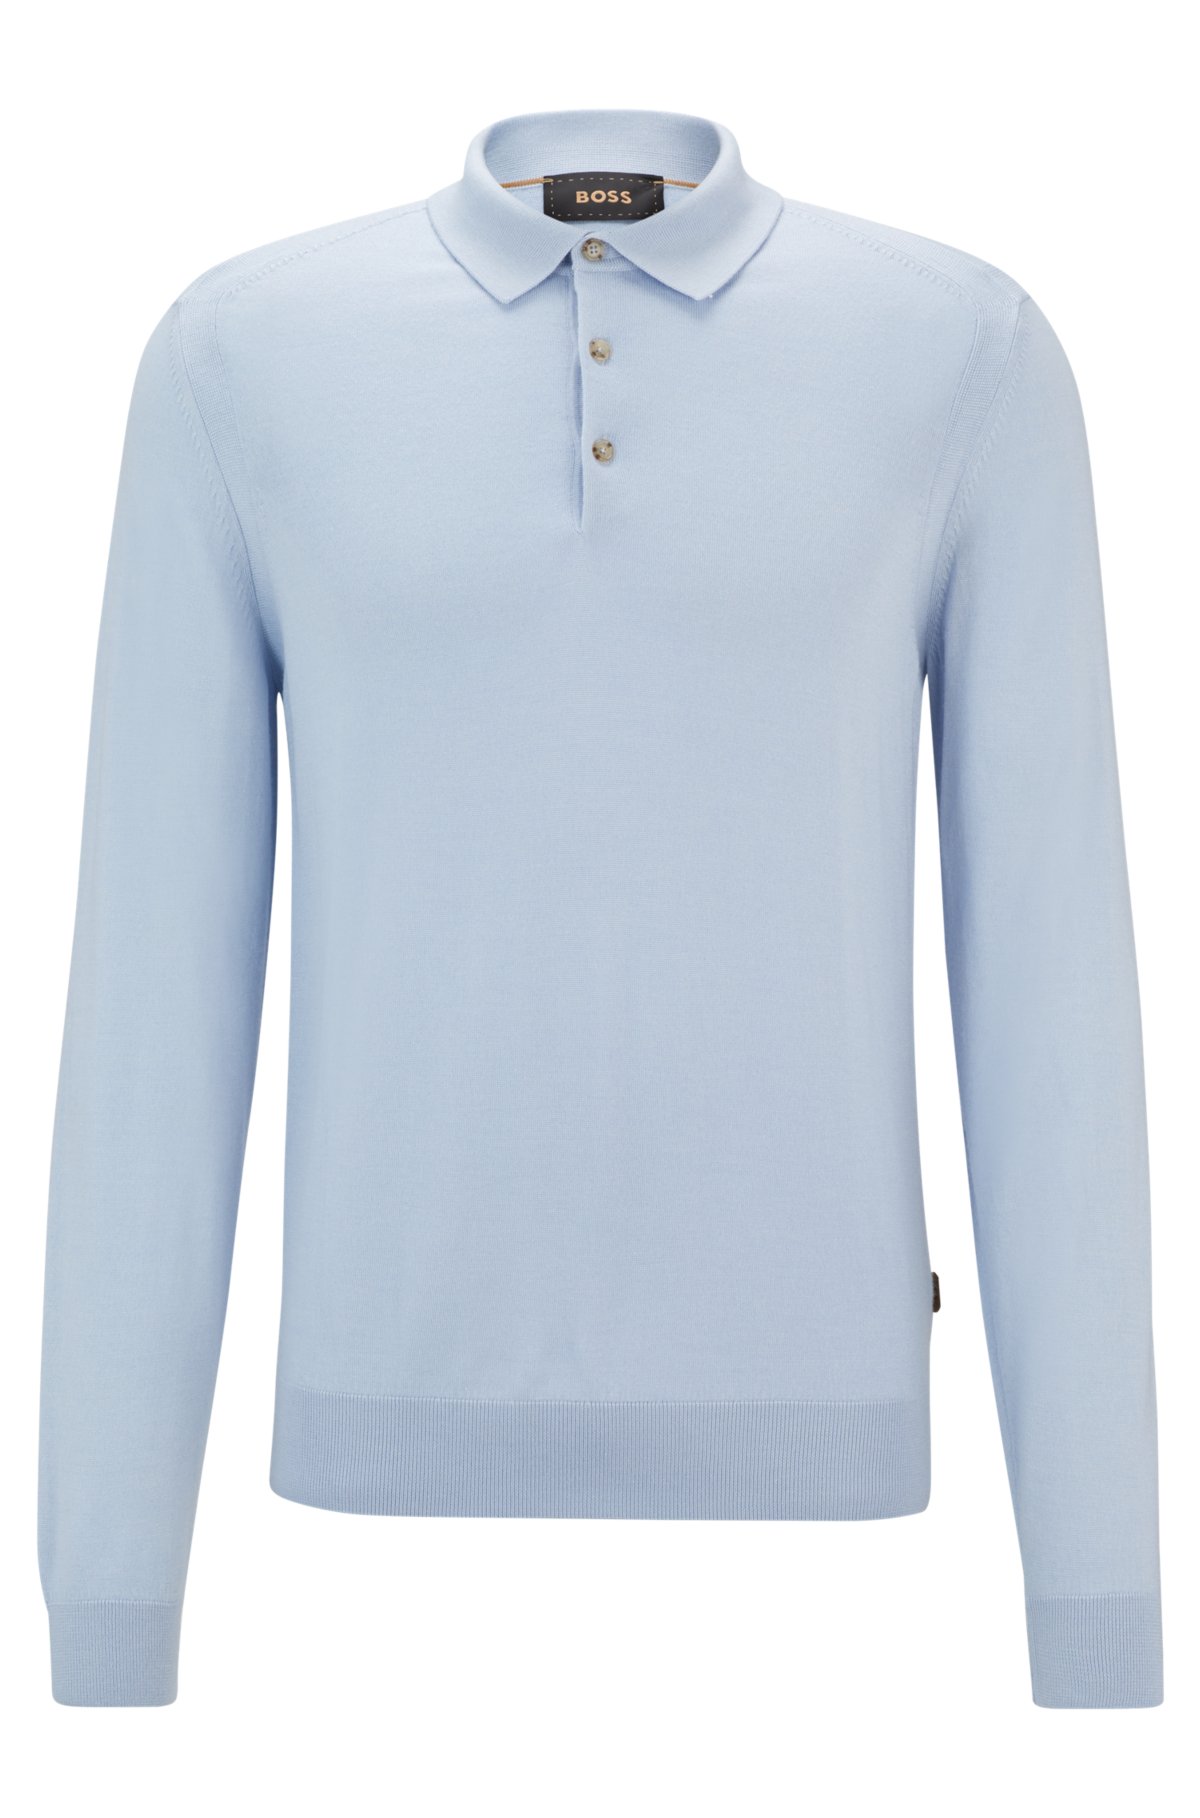 Regular-fit polo sweater in wool, silk and cashmere, Light Blue